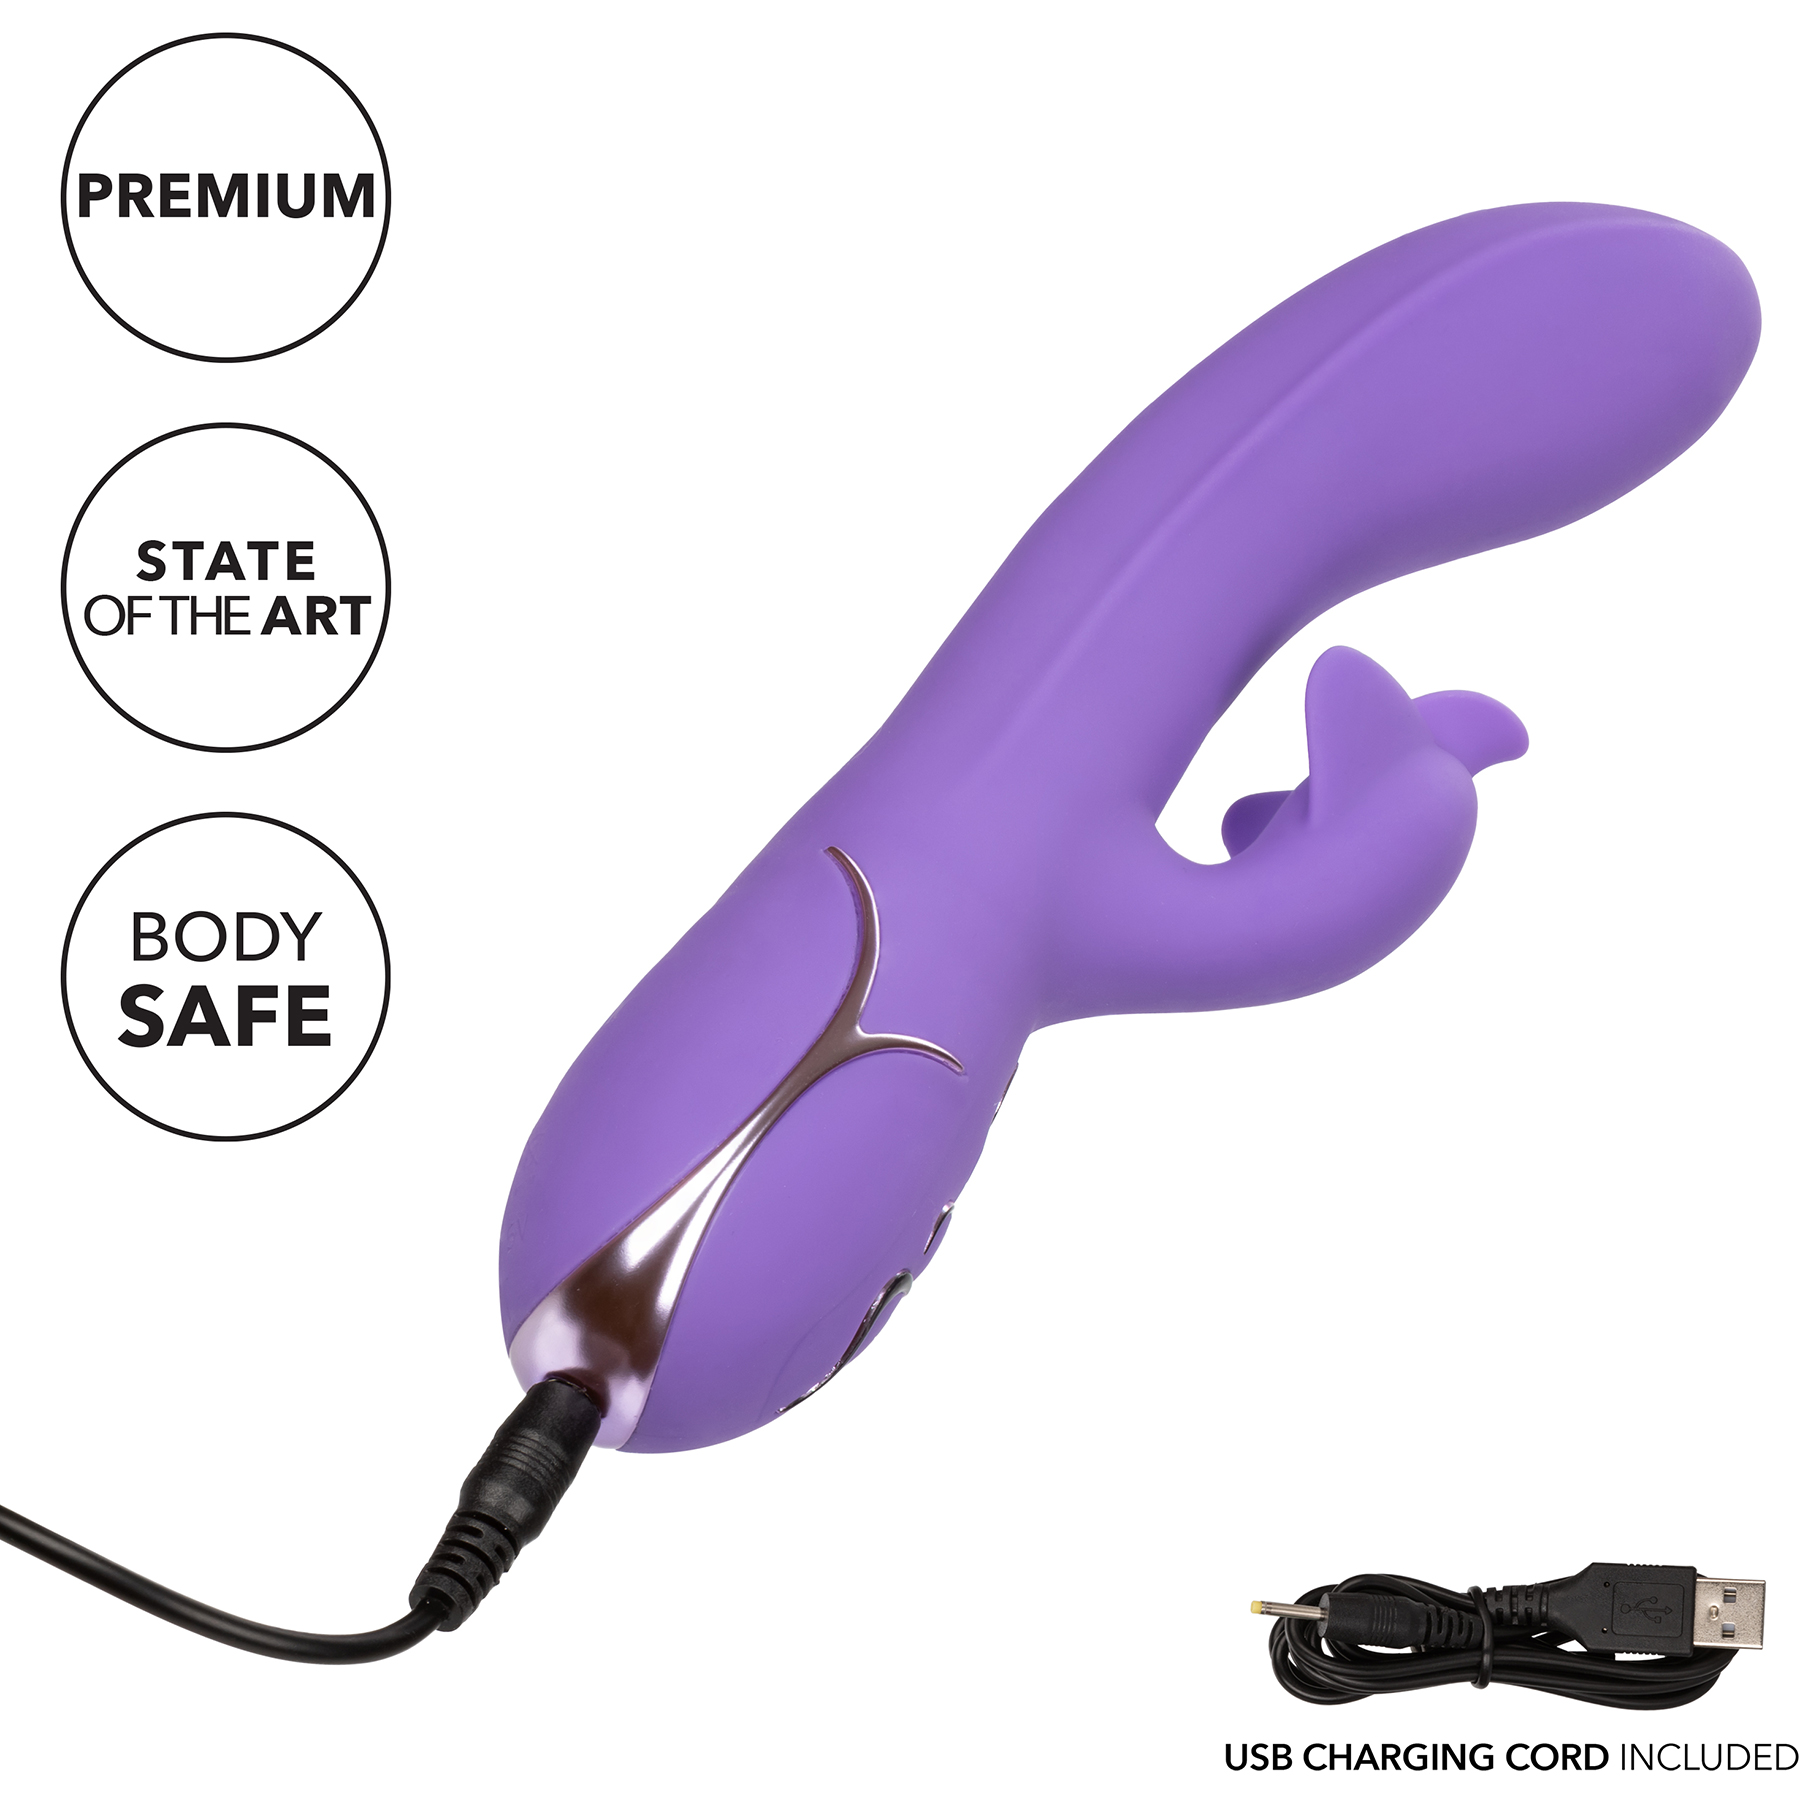  Insatiable G Inflatable G-Flutter Rabbit Style Silicone Vibrator - Charging